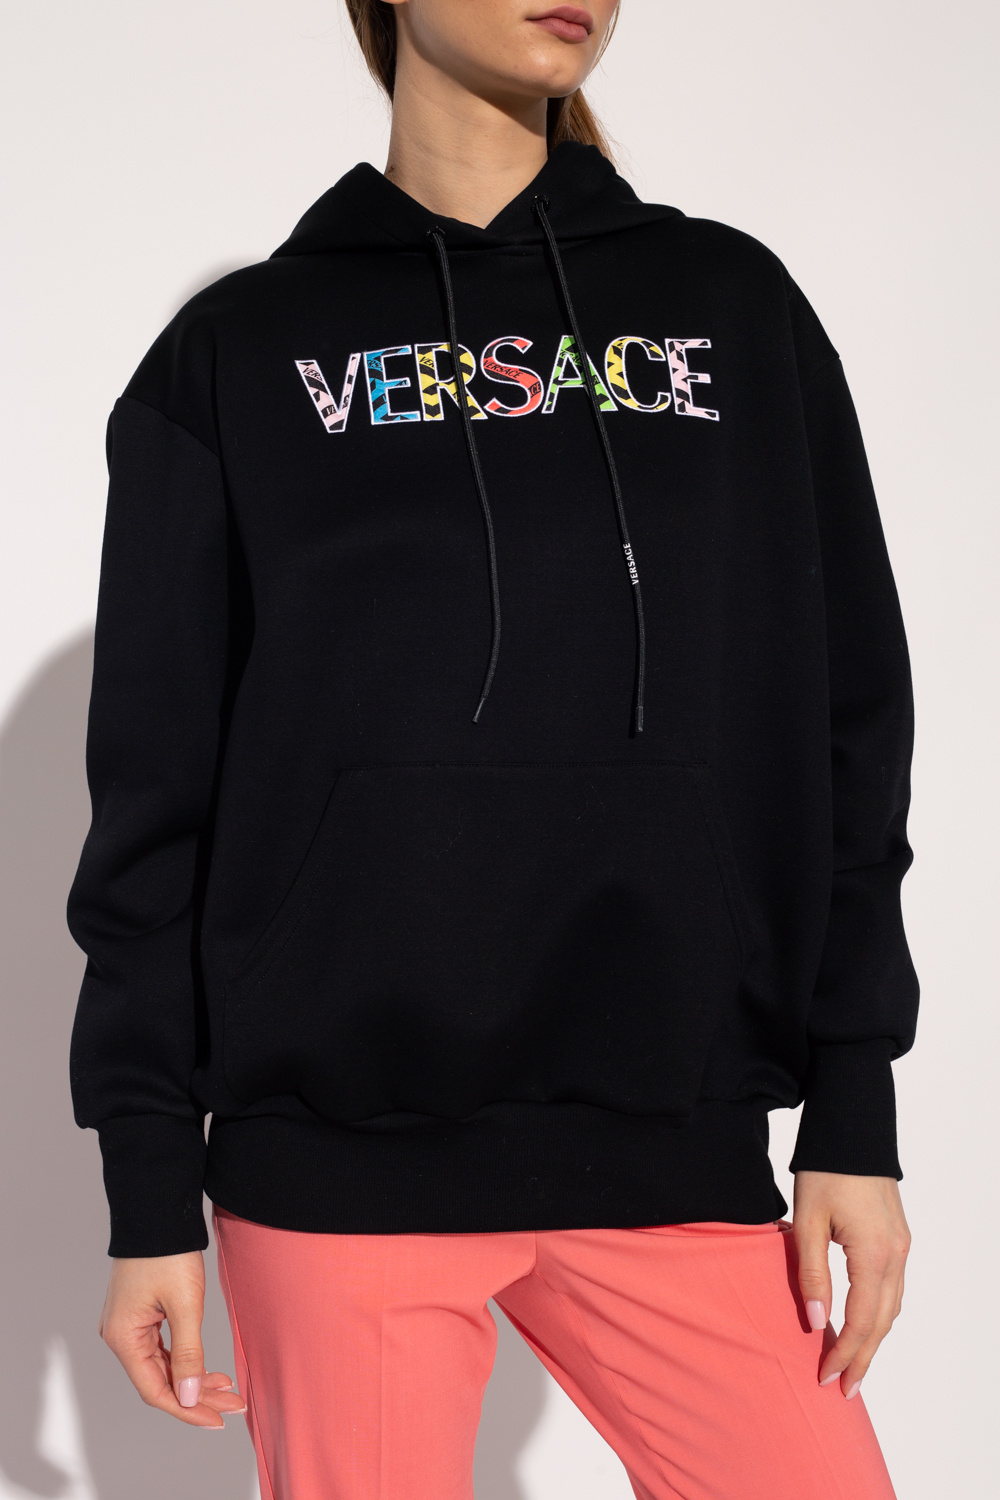 Versace new jordan Covered winter jackets have also been dropped